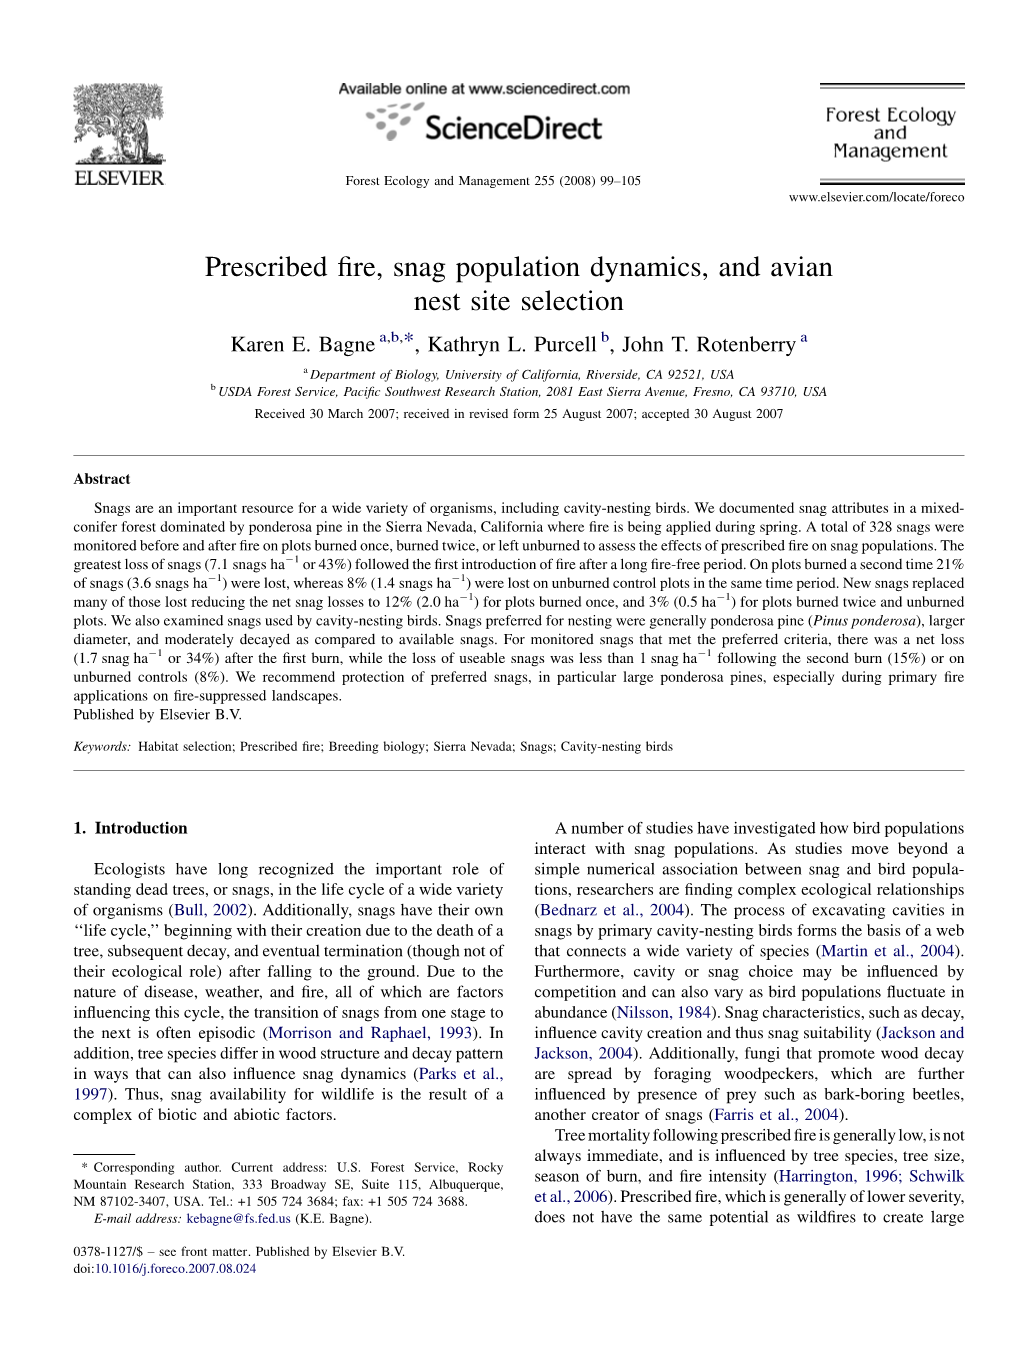 Prescribed Fire, Snag Population Dynamics, and Avian Nest Site